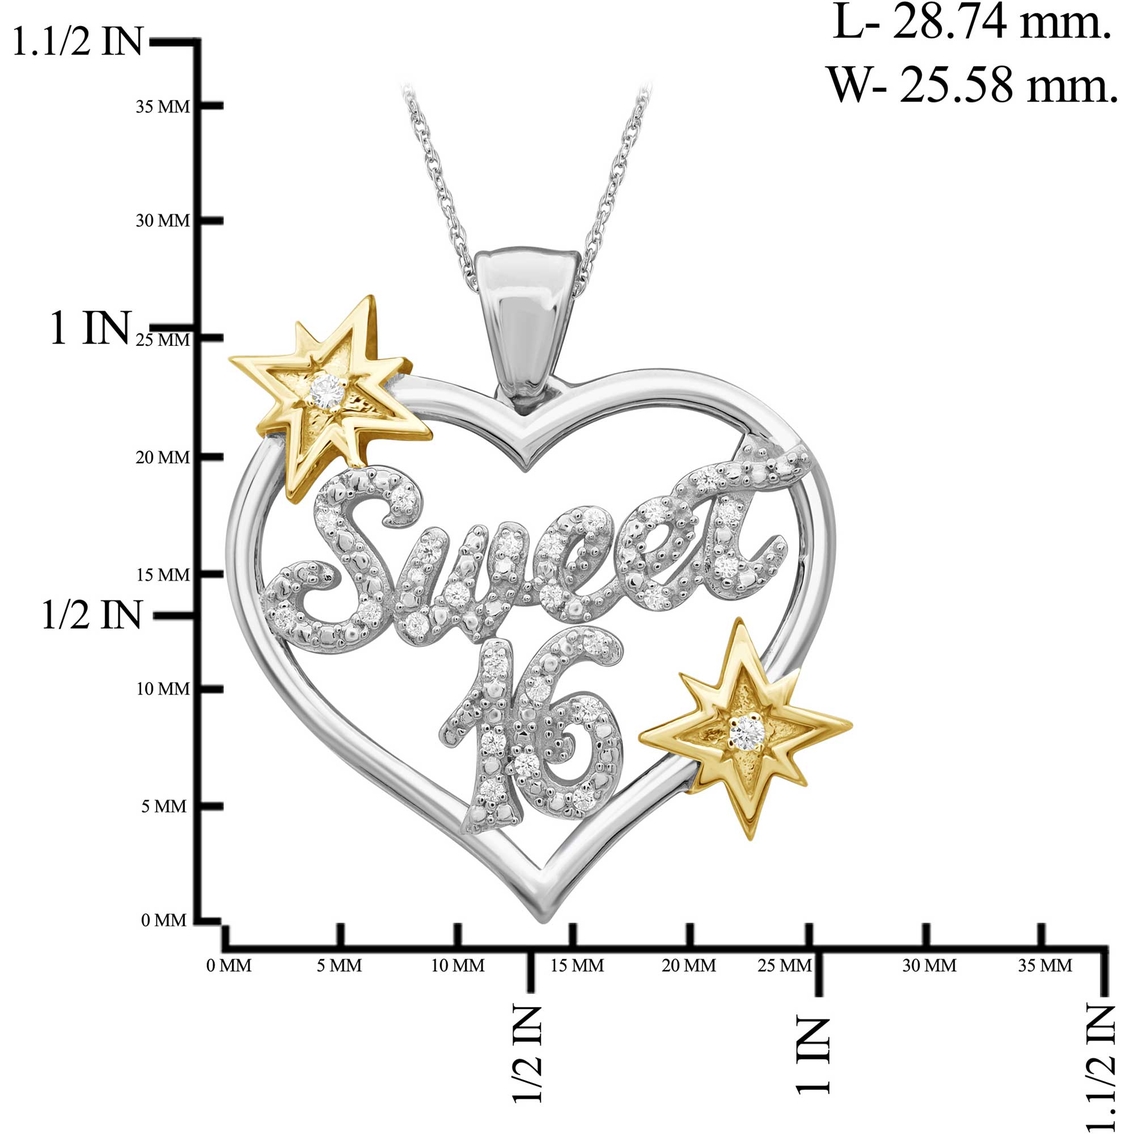 She Shines Sterling Silver and 14K Goldtone 1/7 CTW Diamond Sweet 16 Heart Pendant - Image 4 of 4